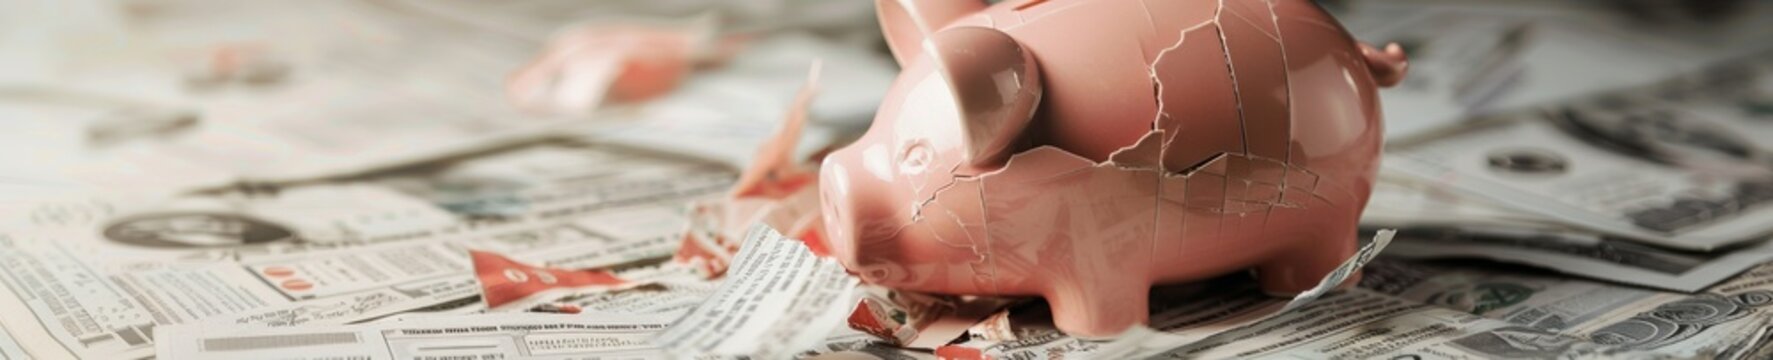 A somber image of a broken piggy bank on top of financial newspapers with headlines about market crashes, representing economic downturn